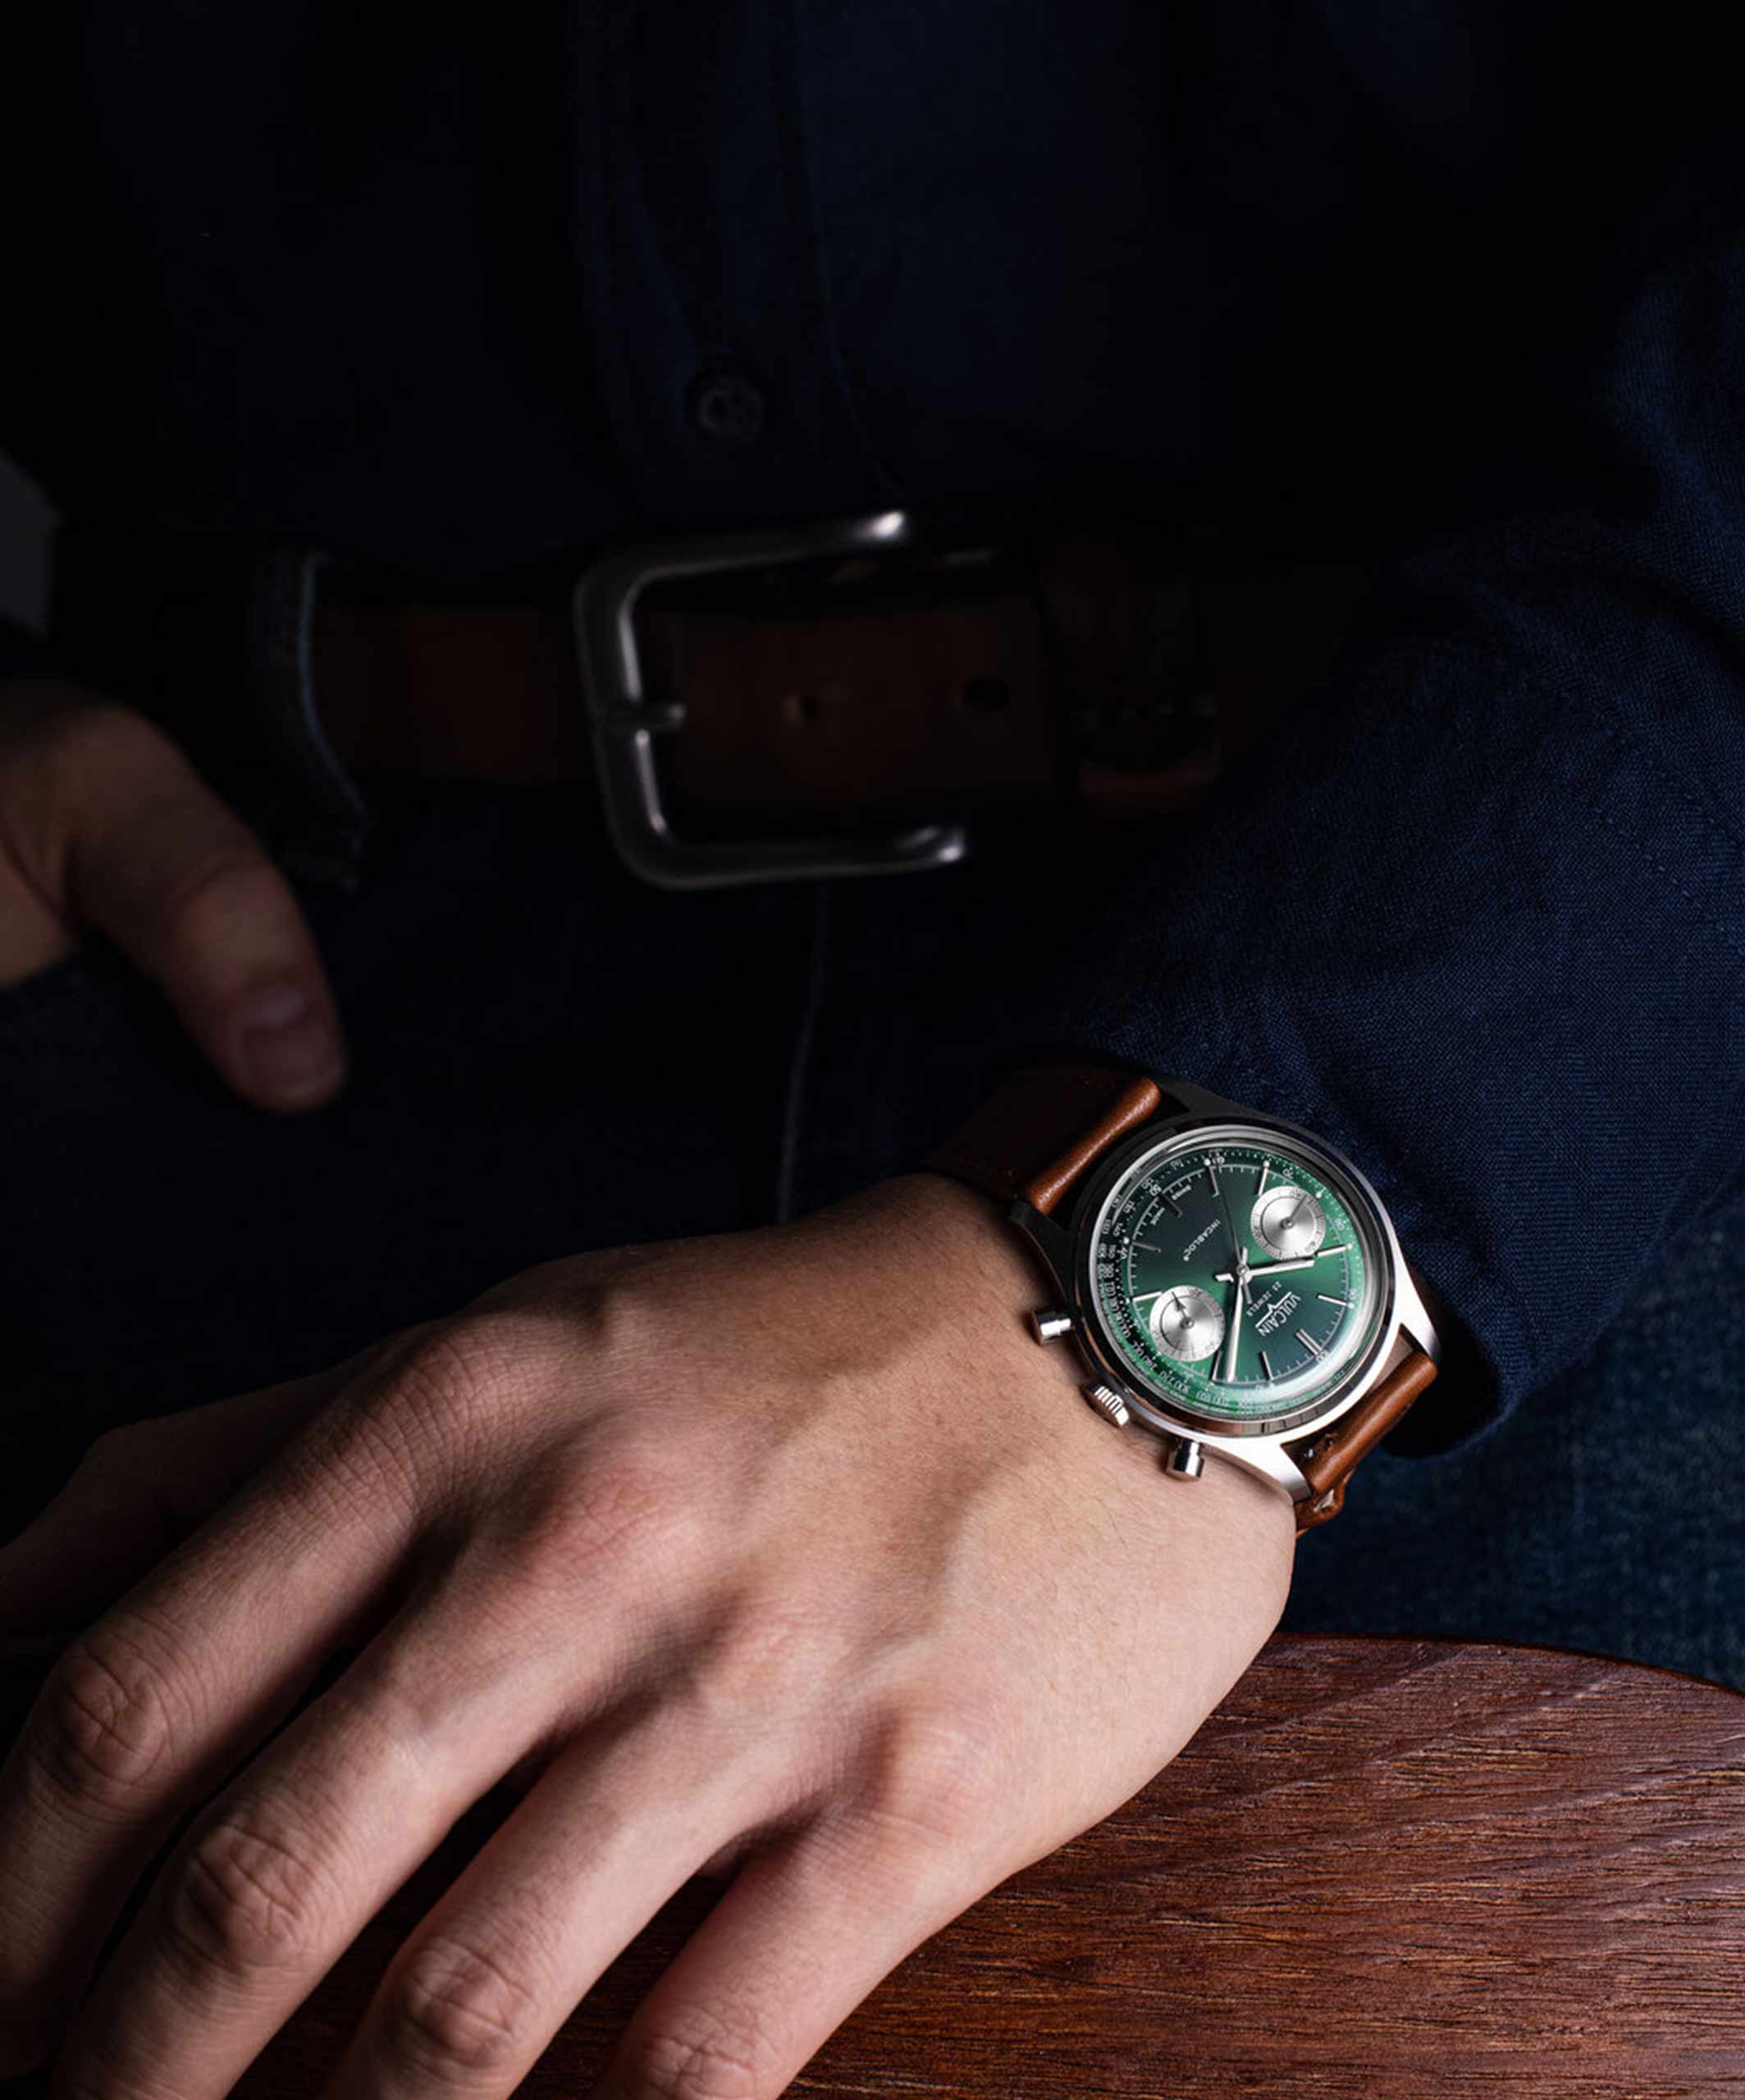 Watches, Stories, & Gear: Tactile Turn’s First Flashlight, a Green Dialed Vulcain Chronograph, and the Final Trailer for 3 Body Problem Arrives